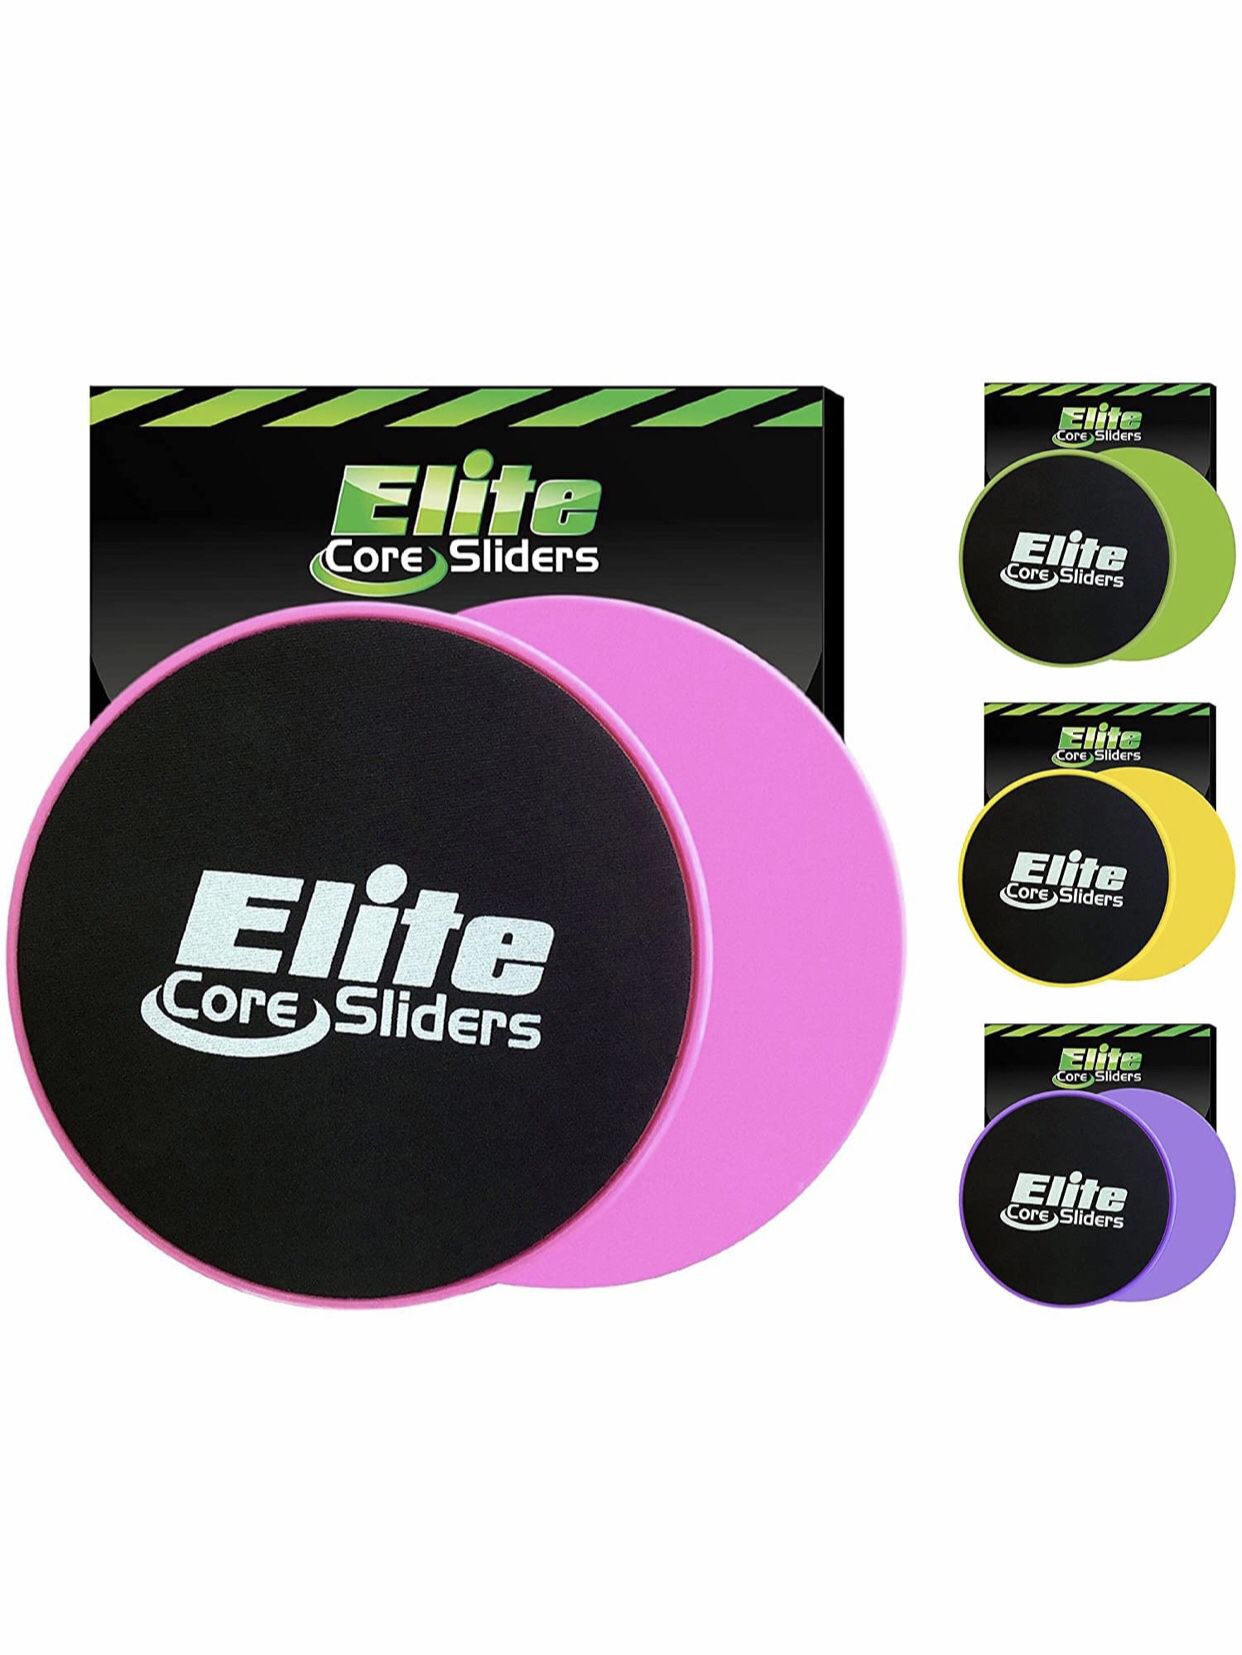 Elite Sportz Sliders for Working Out, 2 Dual Sided Gliding Discs for Exercise on Carpet & Hardwood Floors, Compact Core Gliders for Home Gym - Fitness